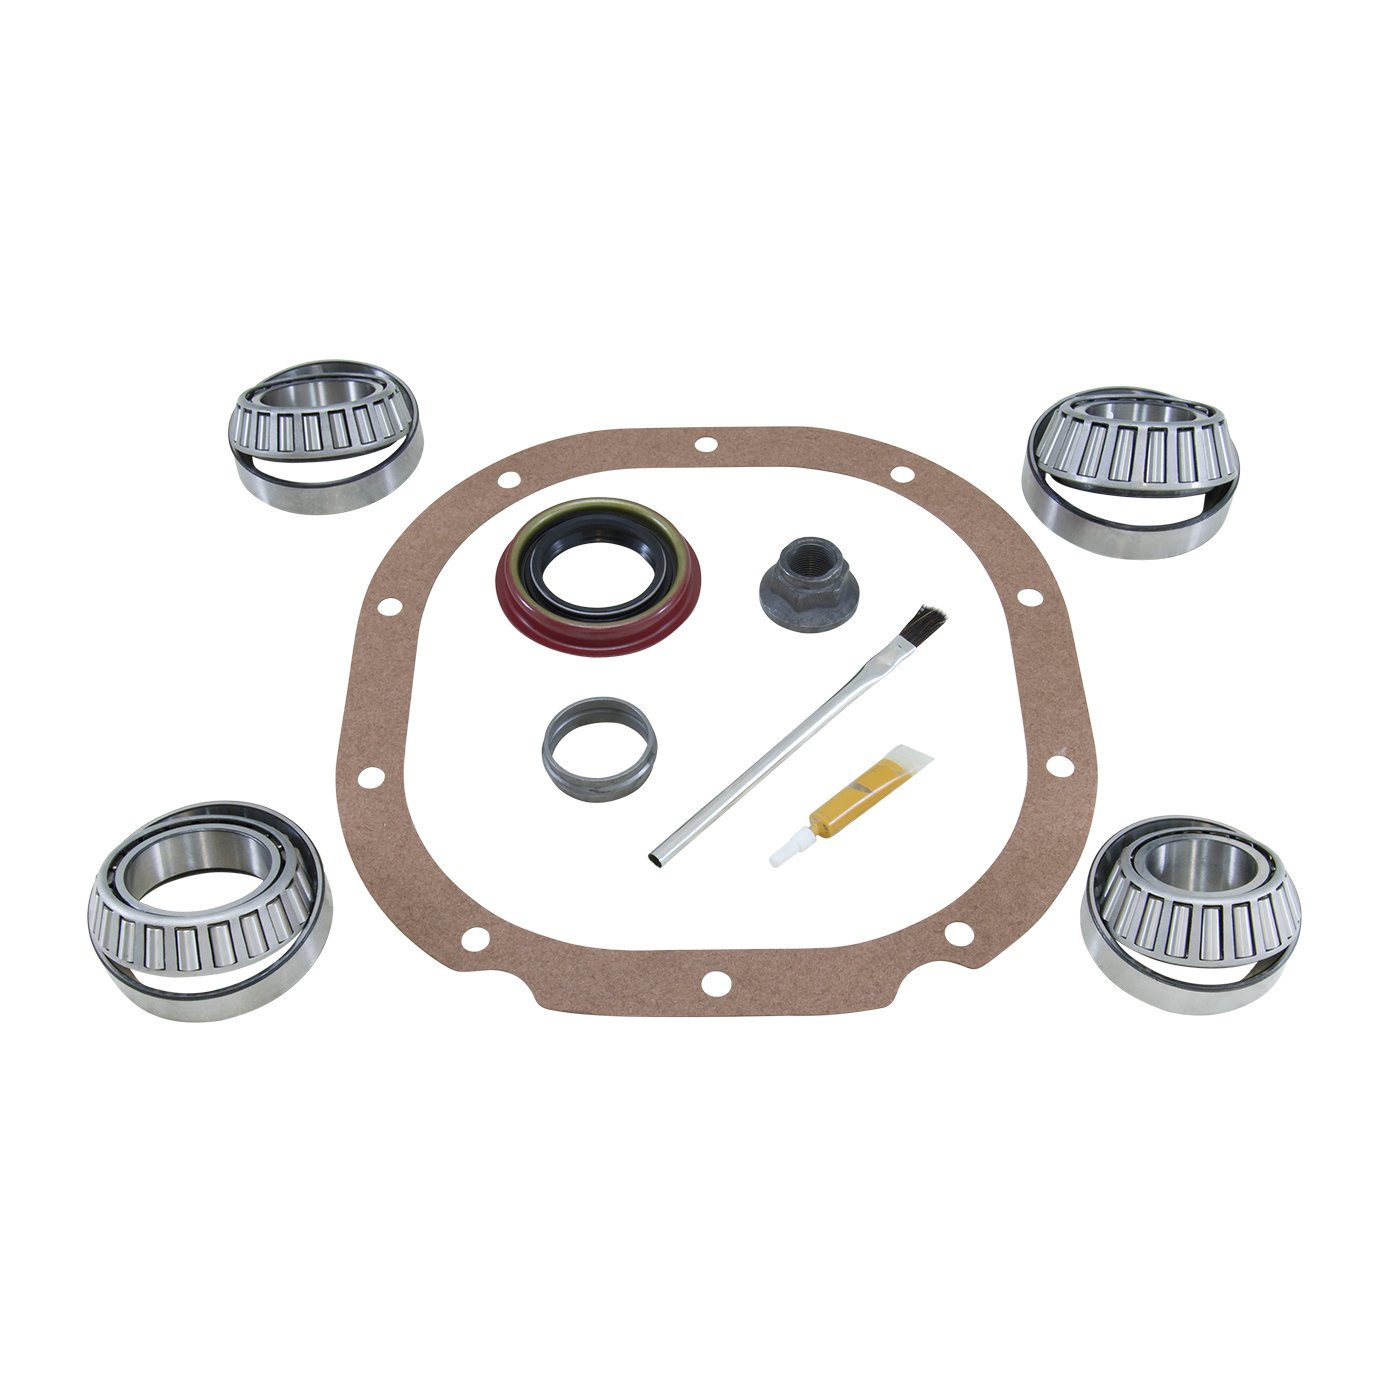 USA Standard ZBKF8.8 Bearing Kit, For '09 & Down Ford 8.8